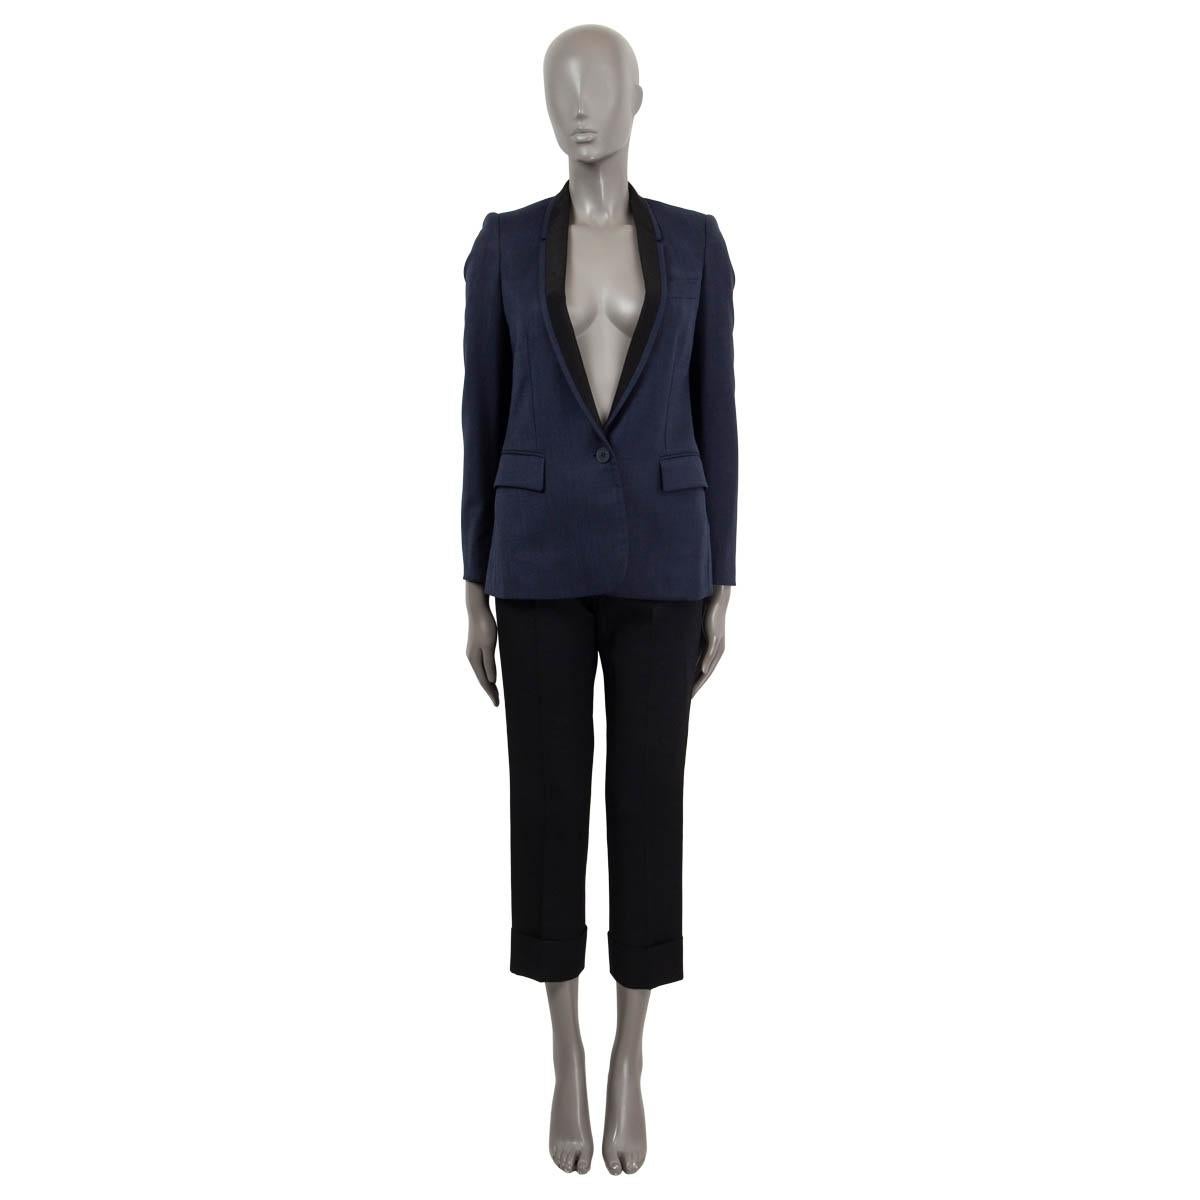 100% authentic Stella McCartney shawl collar single button blazer in navy and black wool (100%), rayon (100%), rayon (52%) and cotton (48%). Features two flap pockets on the front and one chest pocket. Lined in blue rayon (100%). Has been worn and